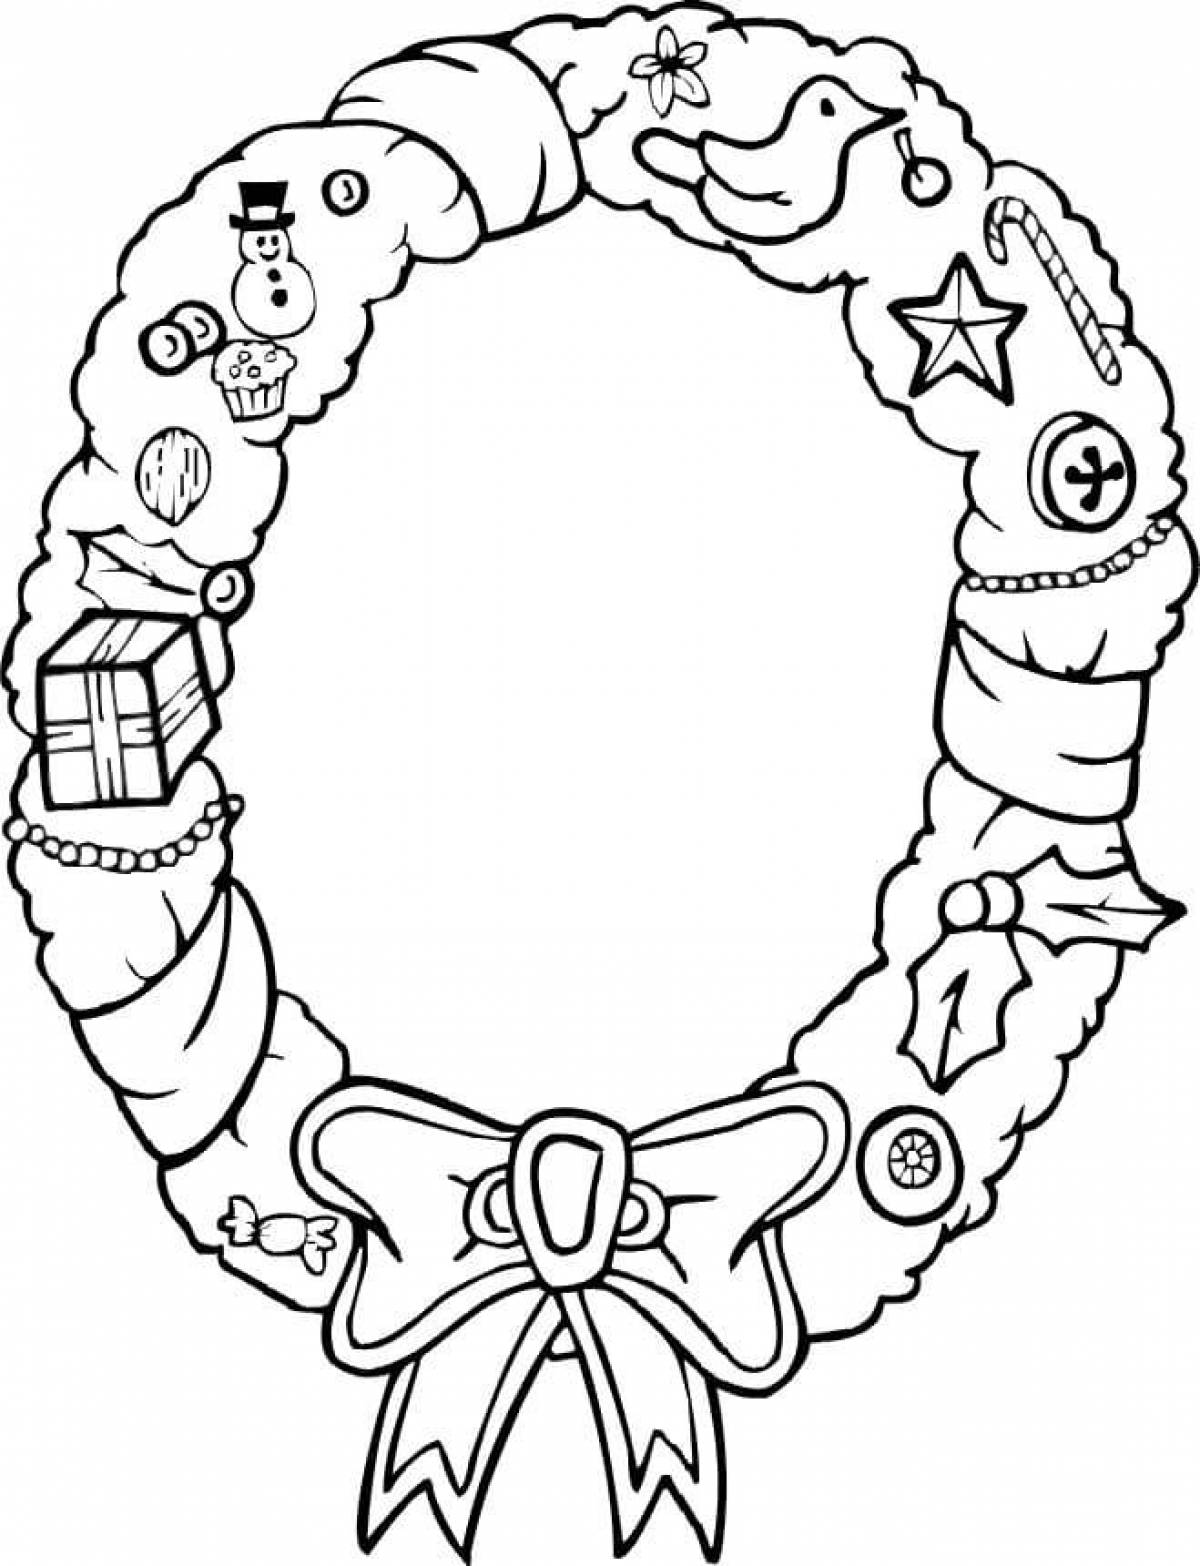 Coloring page decorative christmas wreath